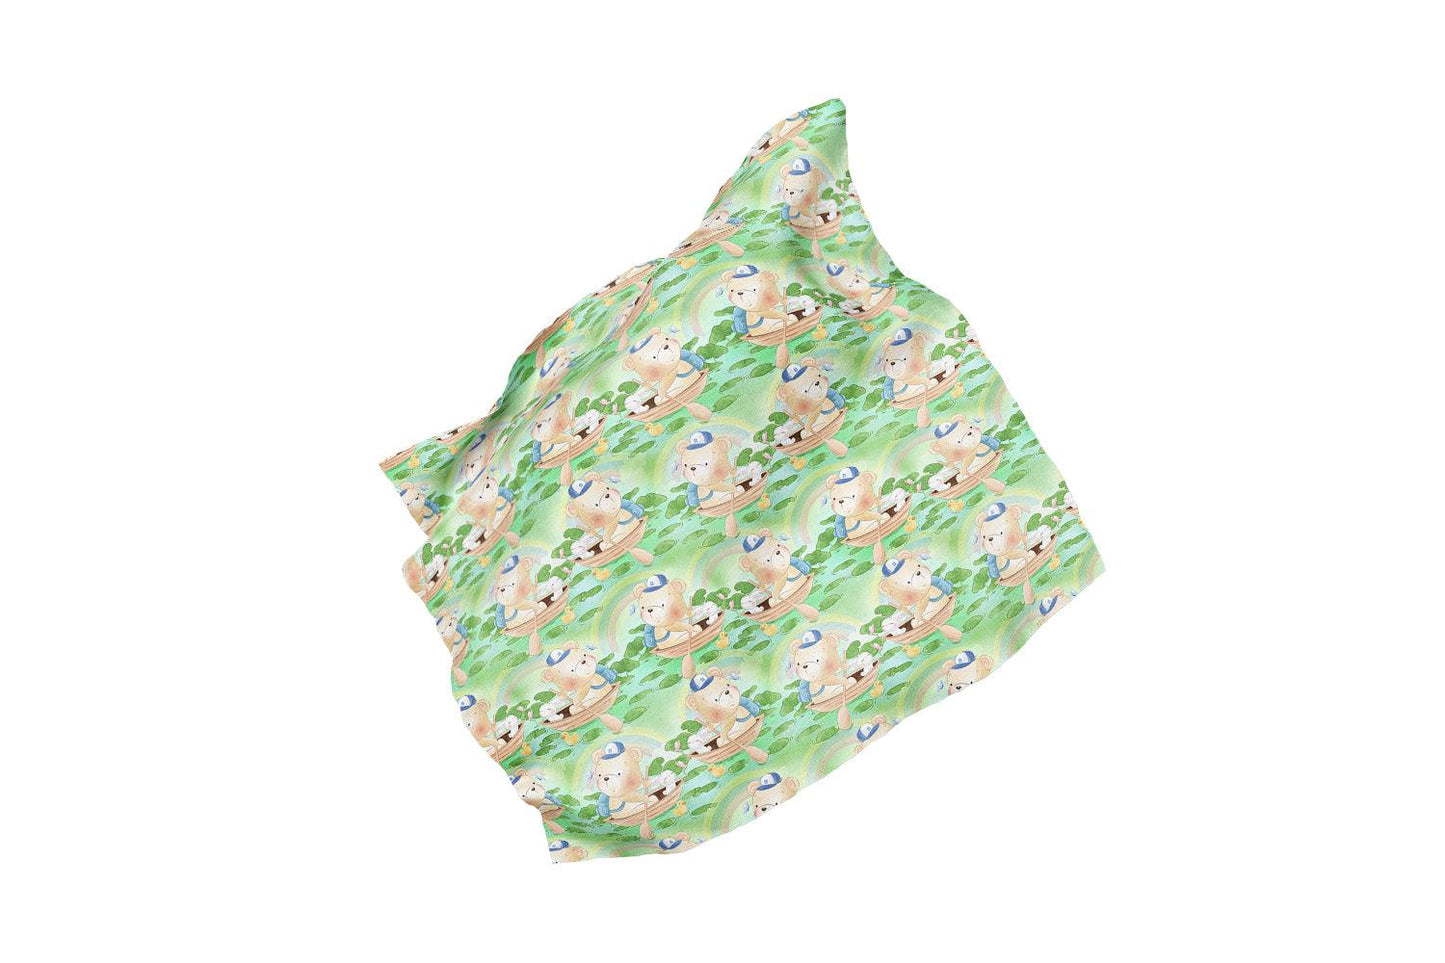 Load image into Gallery viewer, Design 17 - Cute Bear Fabric - Fabric by Missy Rose Pre-Order
